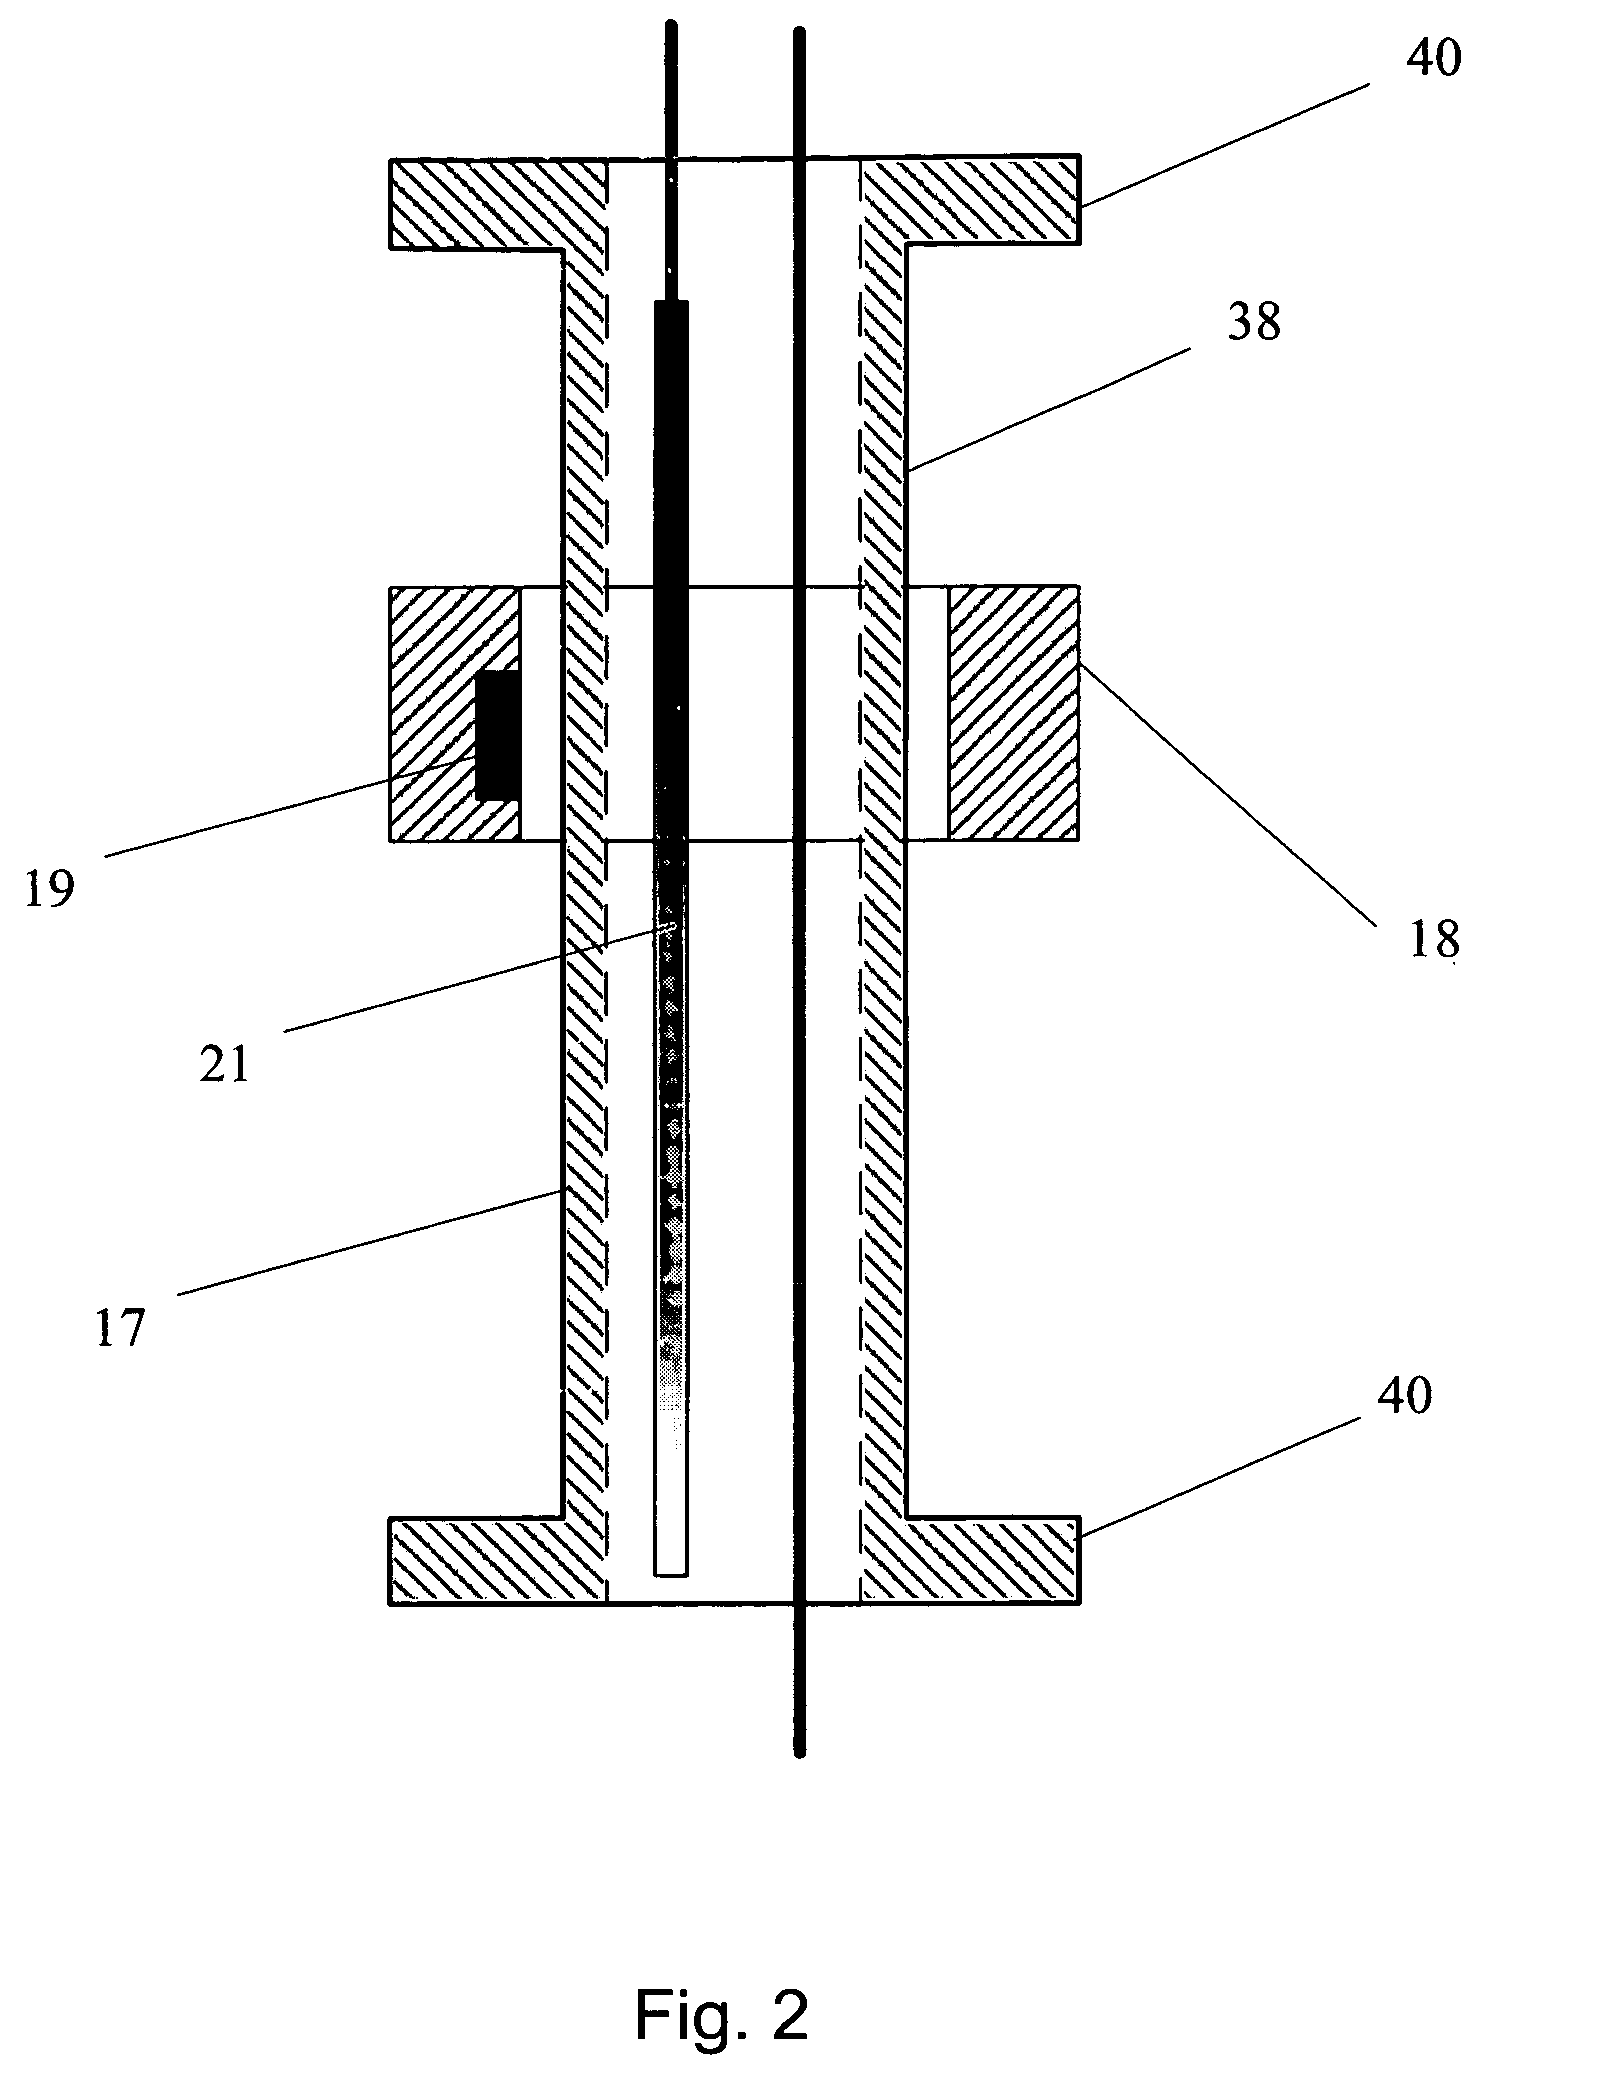 Method of monitoring dual-phase liquid and interface levels